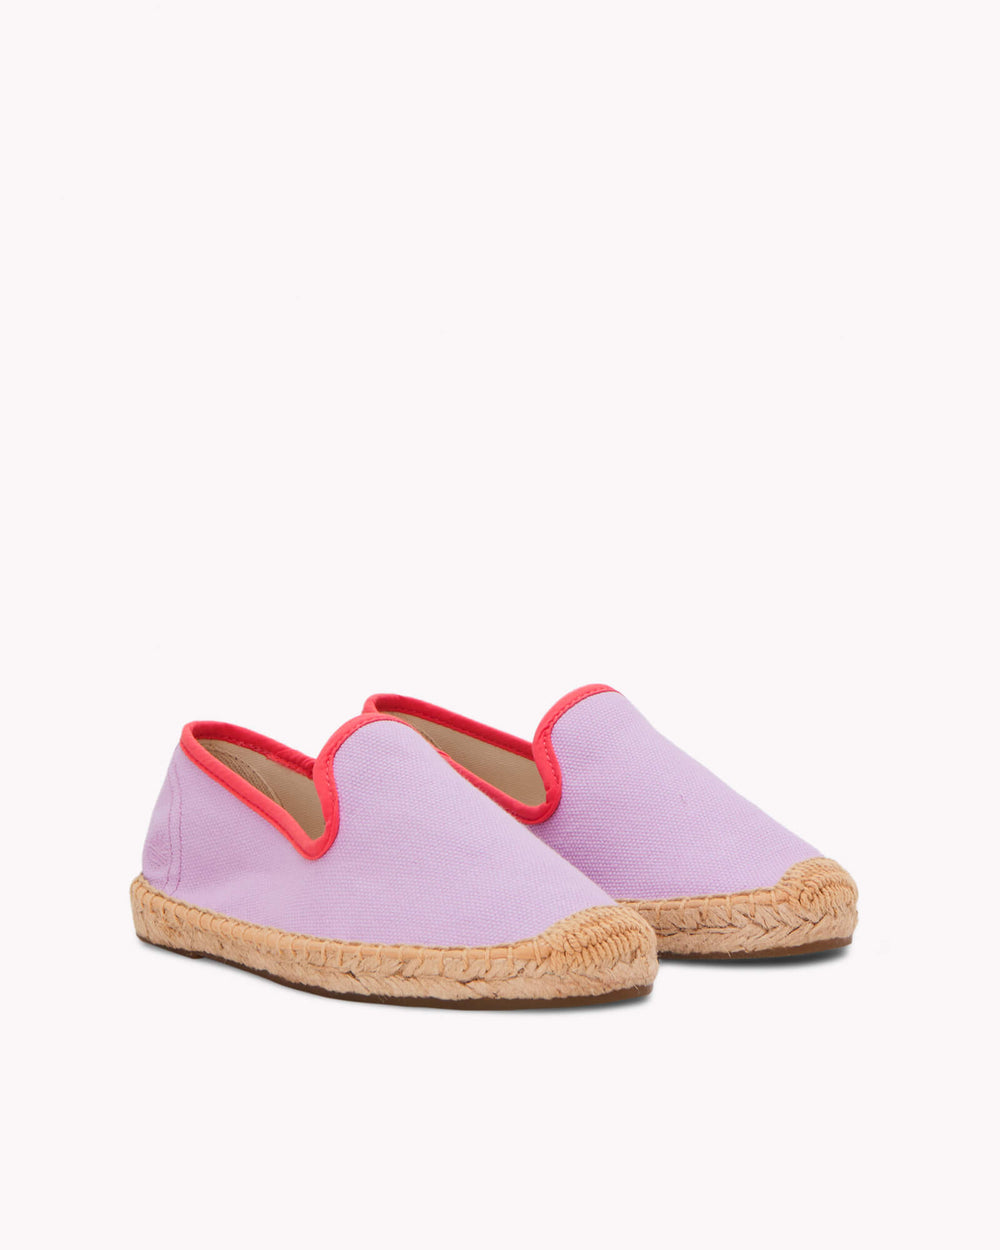 Kids lavender espadrille shoes with red piping on gray background